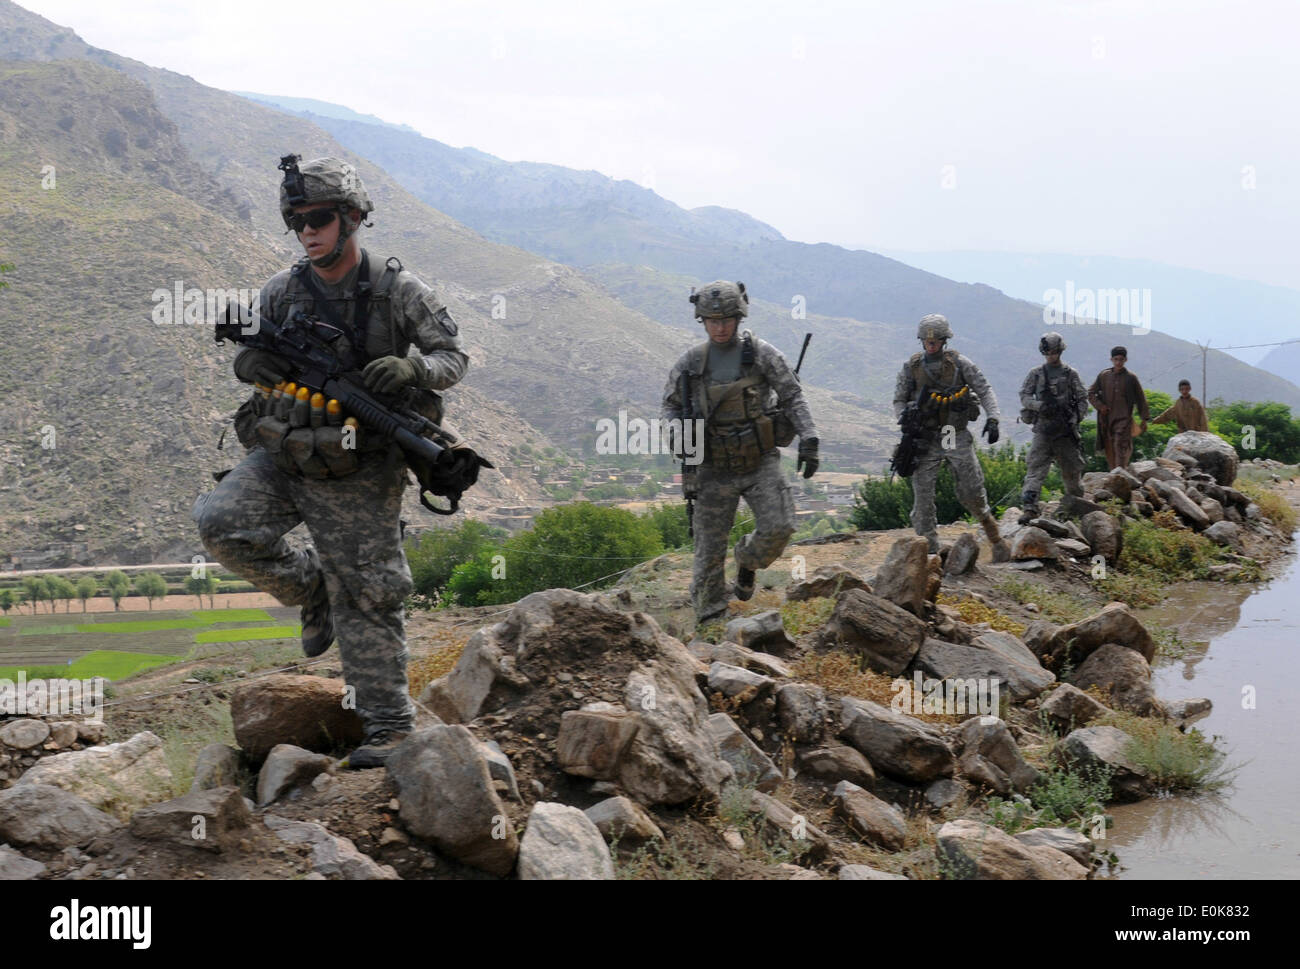 KUNAR PROVINCE, Afghanistan – U.S. Army Soldiers with 3rd Platoon, Company B, 1st Battalion, 327th Infantry Regiment, Task Fo Stock Photo